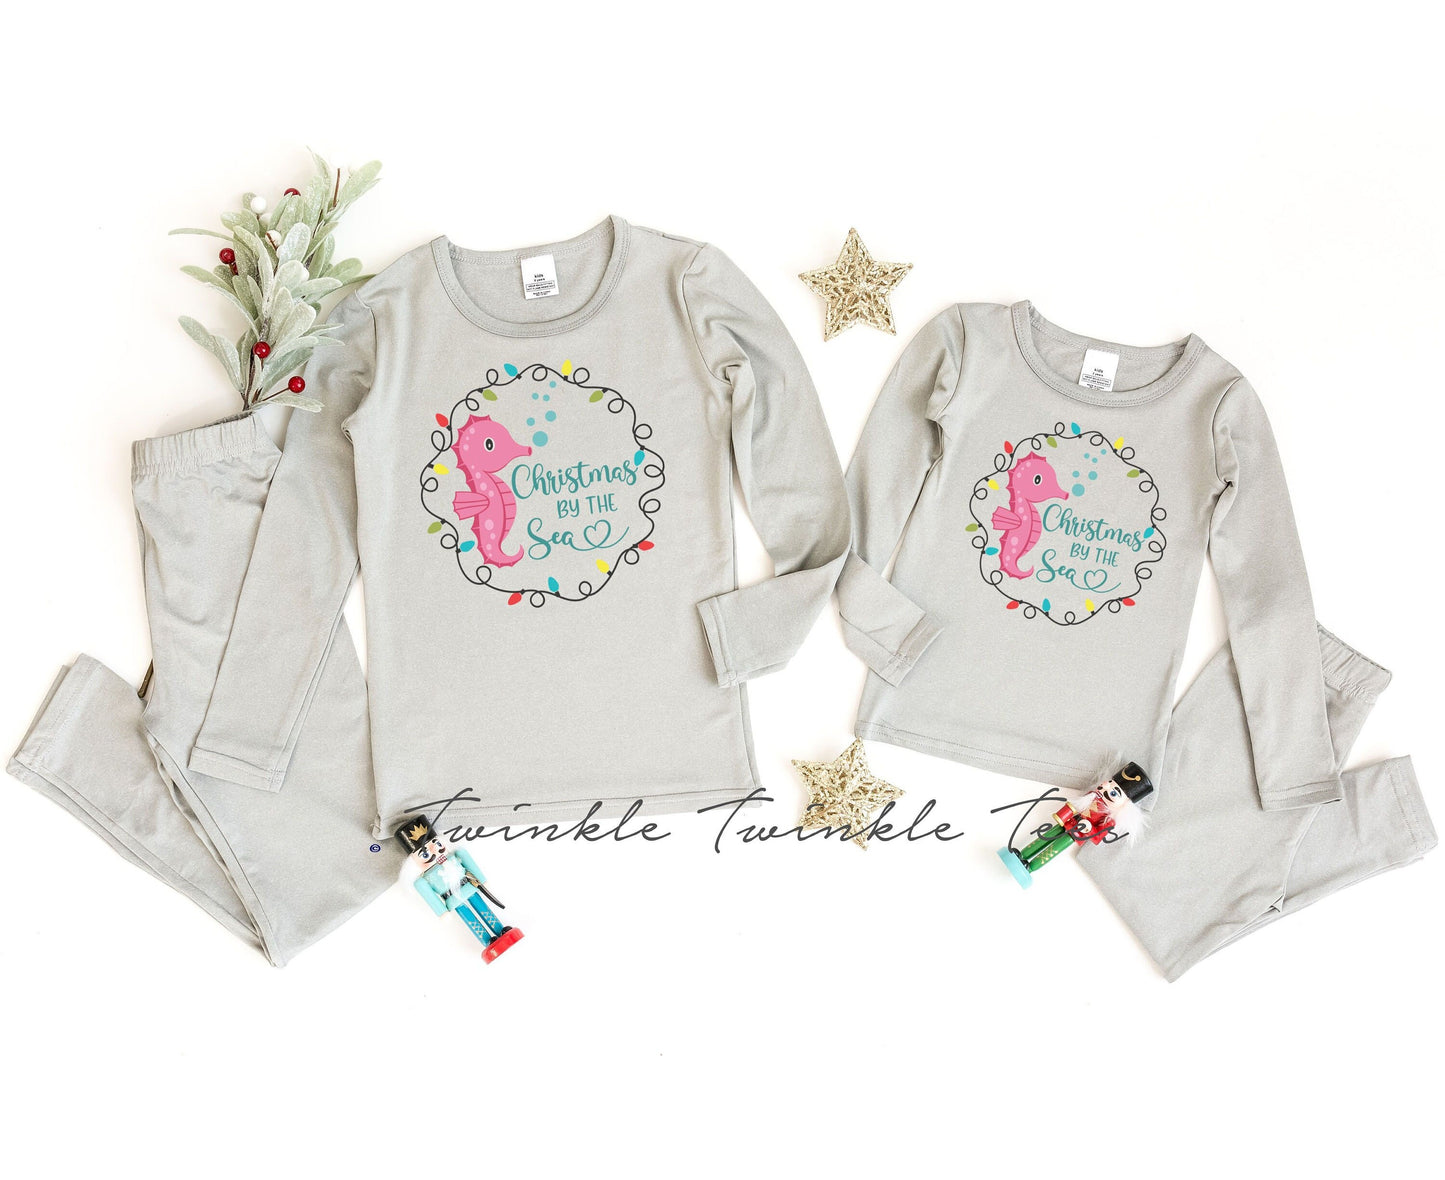 Christmas by the Sea Seahorse Grey Thermal Pajamas, christmas pajamas for the family, thermal pajamas, matching christmas pajamas